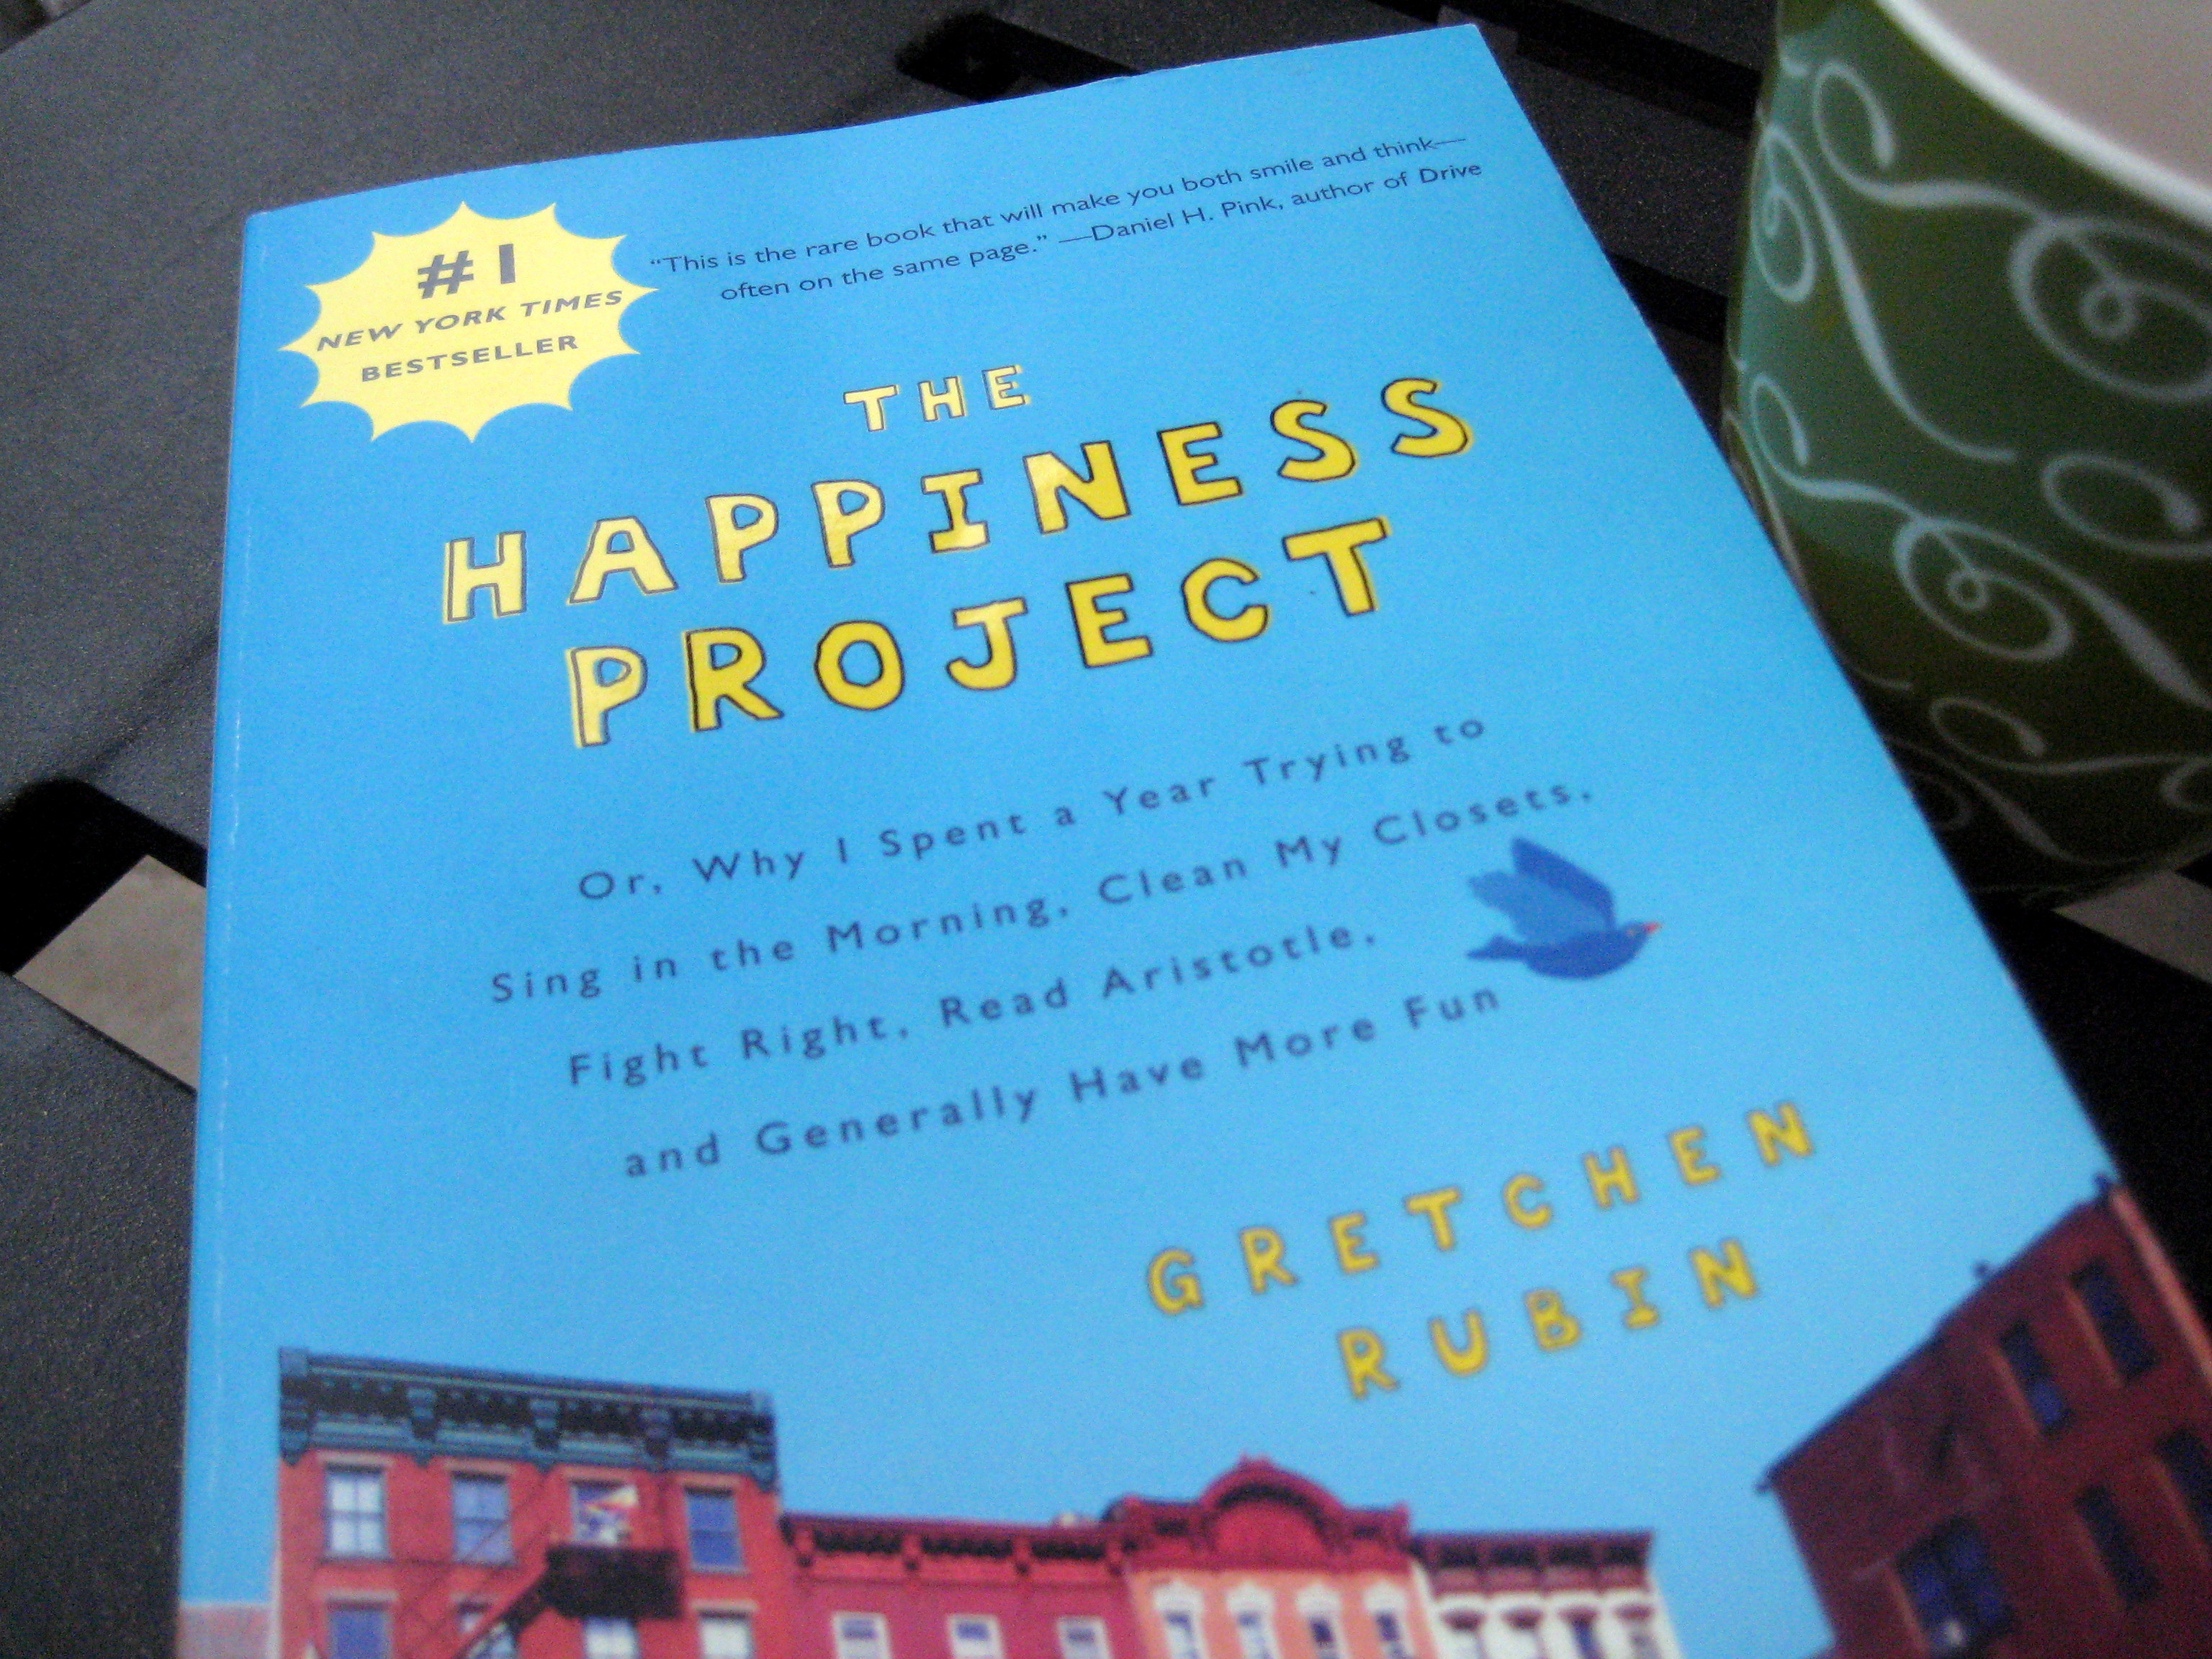 the happiness project :: 1